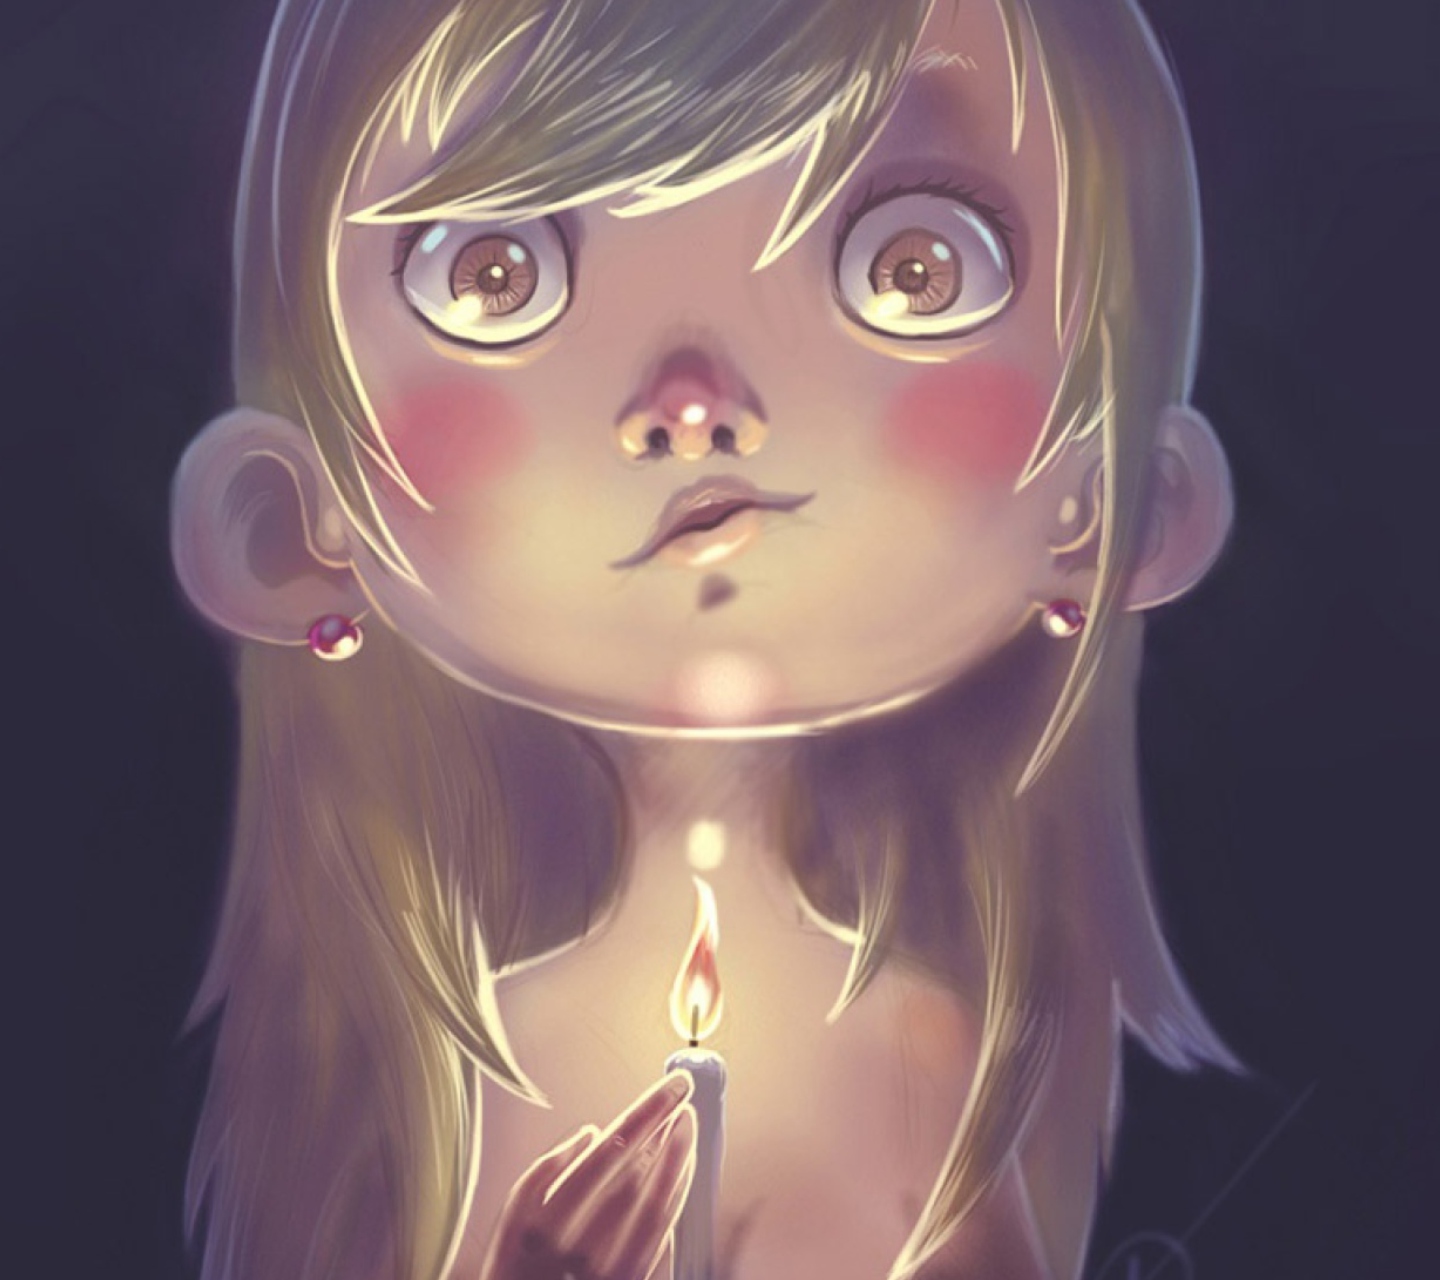 Das Girl With Candle Wallpaper 1440x1280